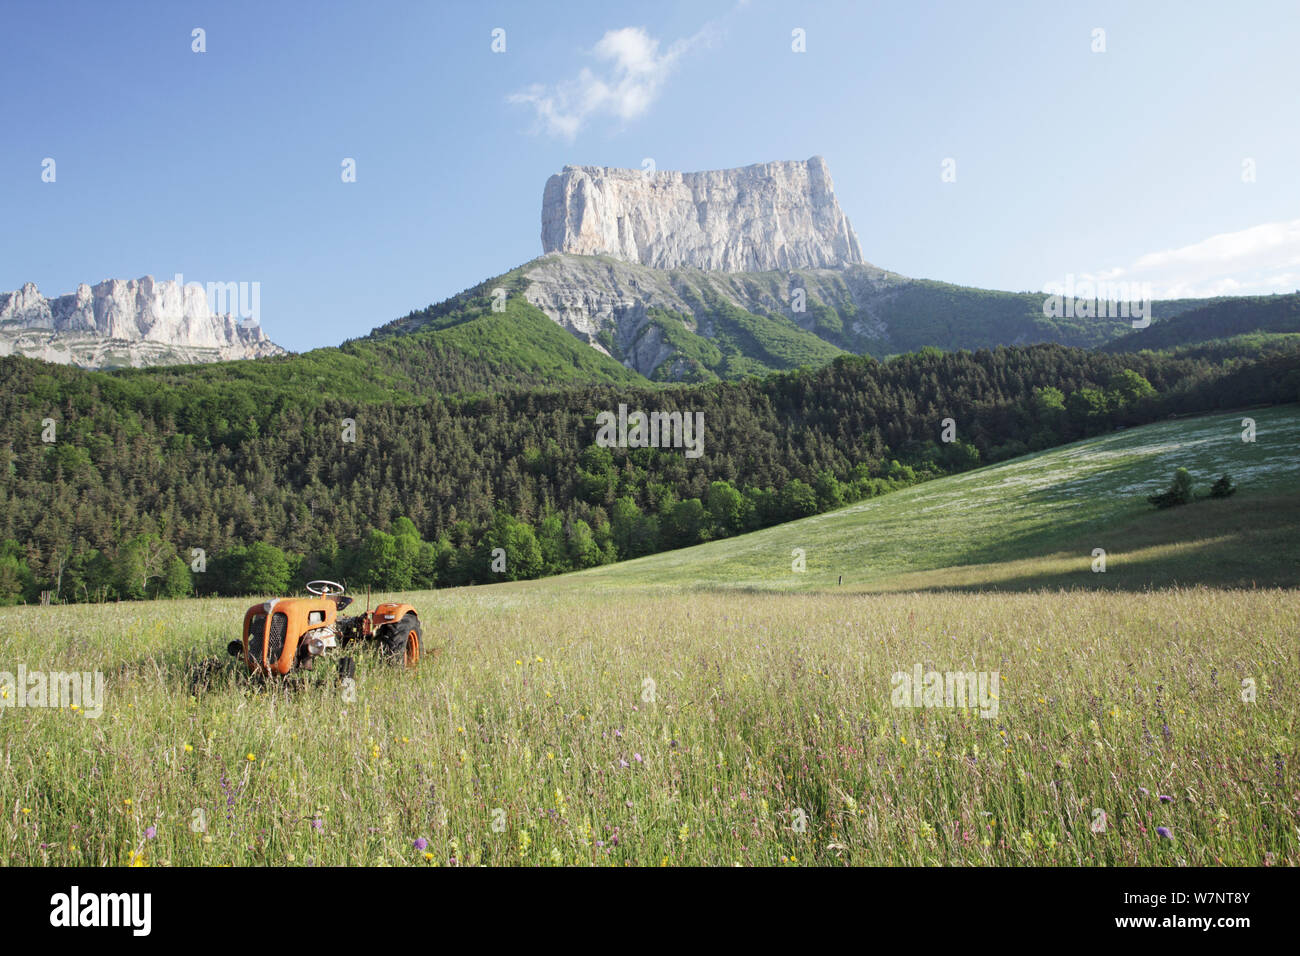 View of Mont Aiguille, with wildflower meadow and tractor in the foreground, Richardiere near Chichilianne, Parc Naturel Regional du Vercors, France, June 2012. Stock Photo